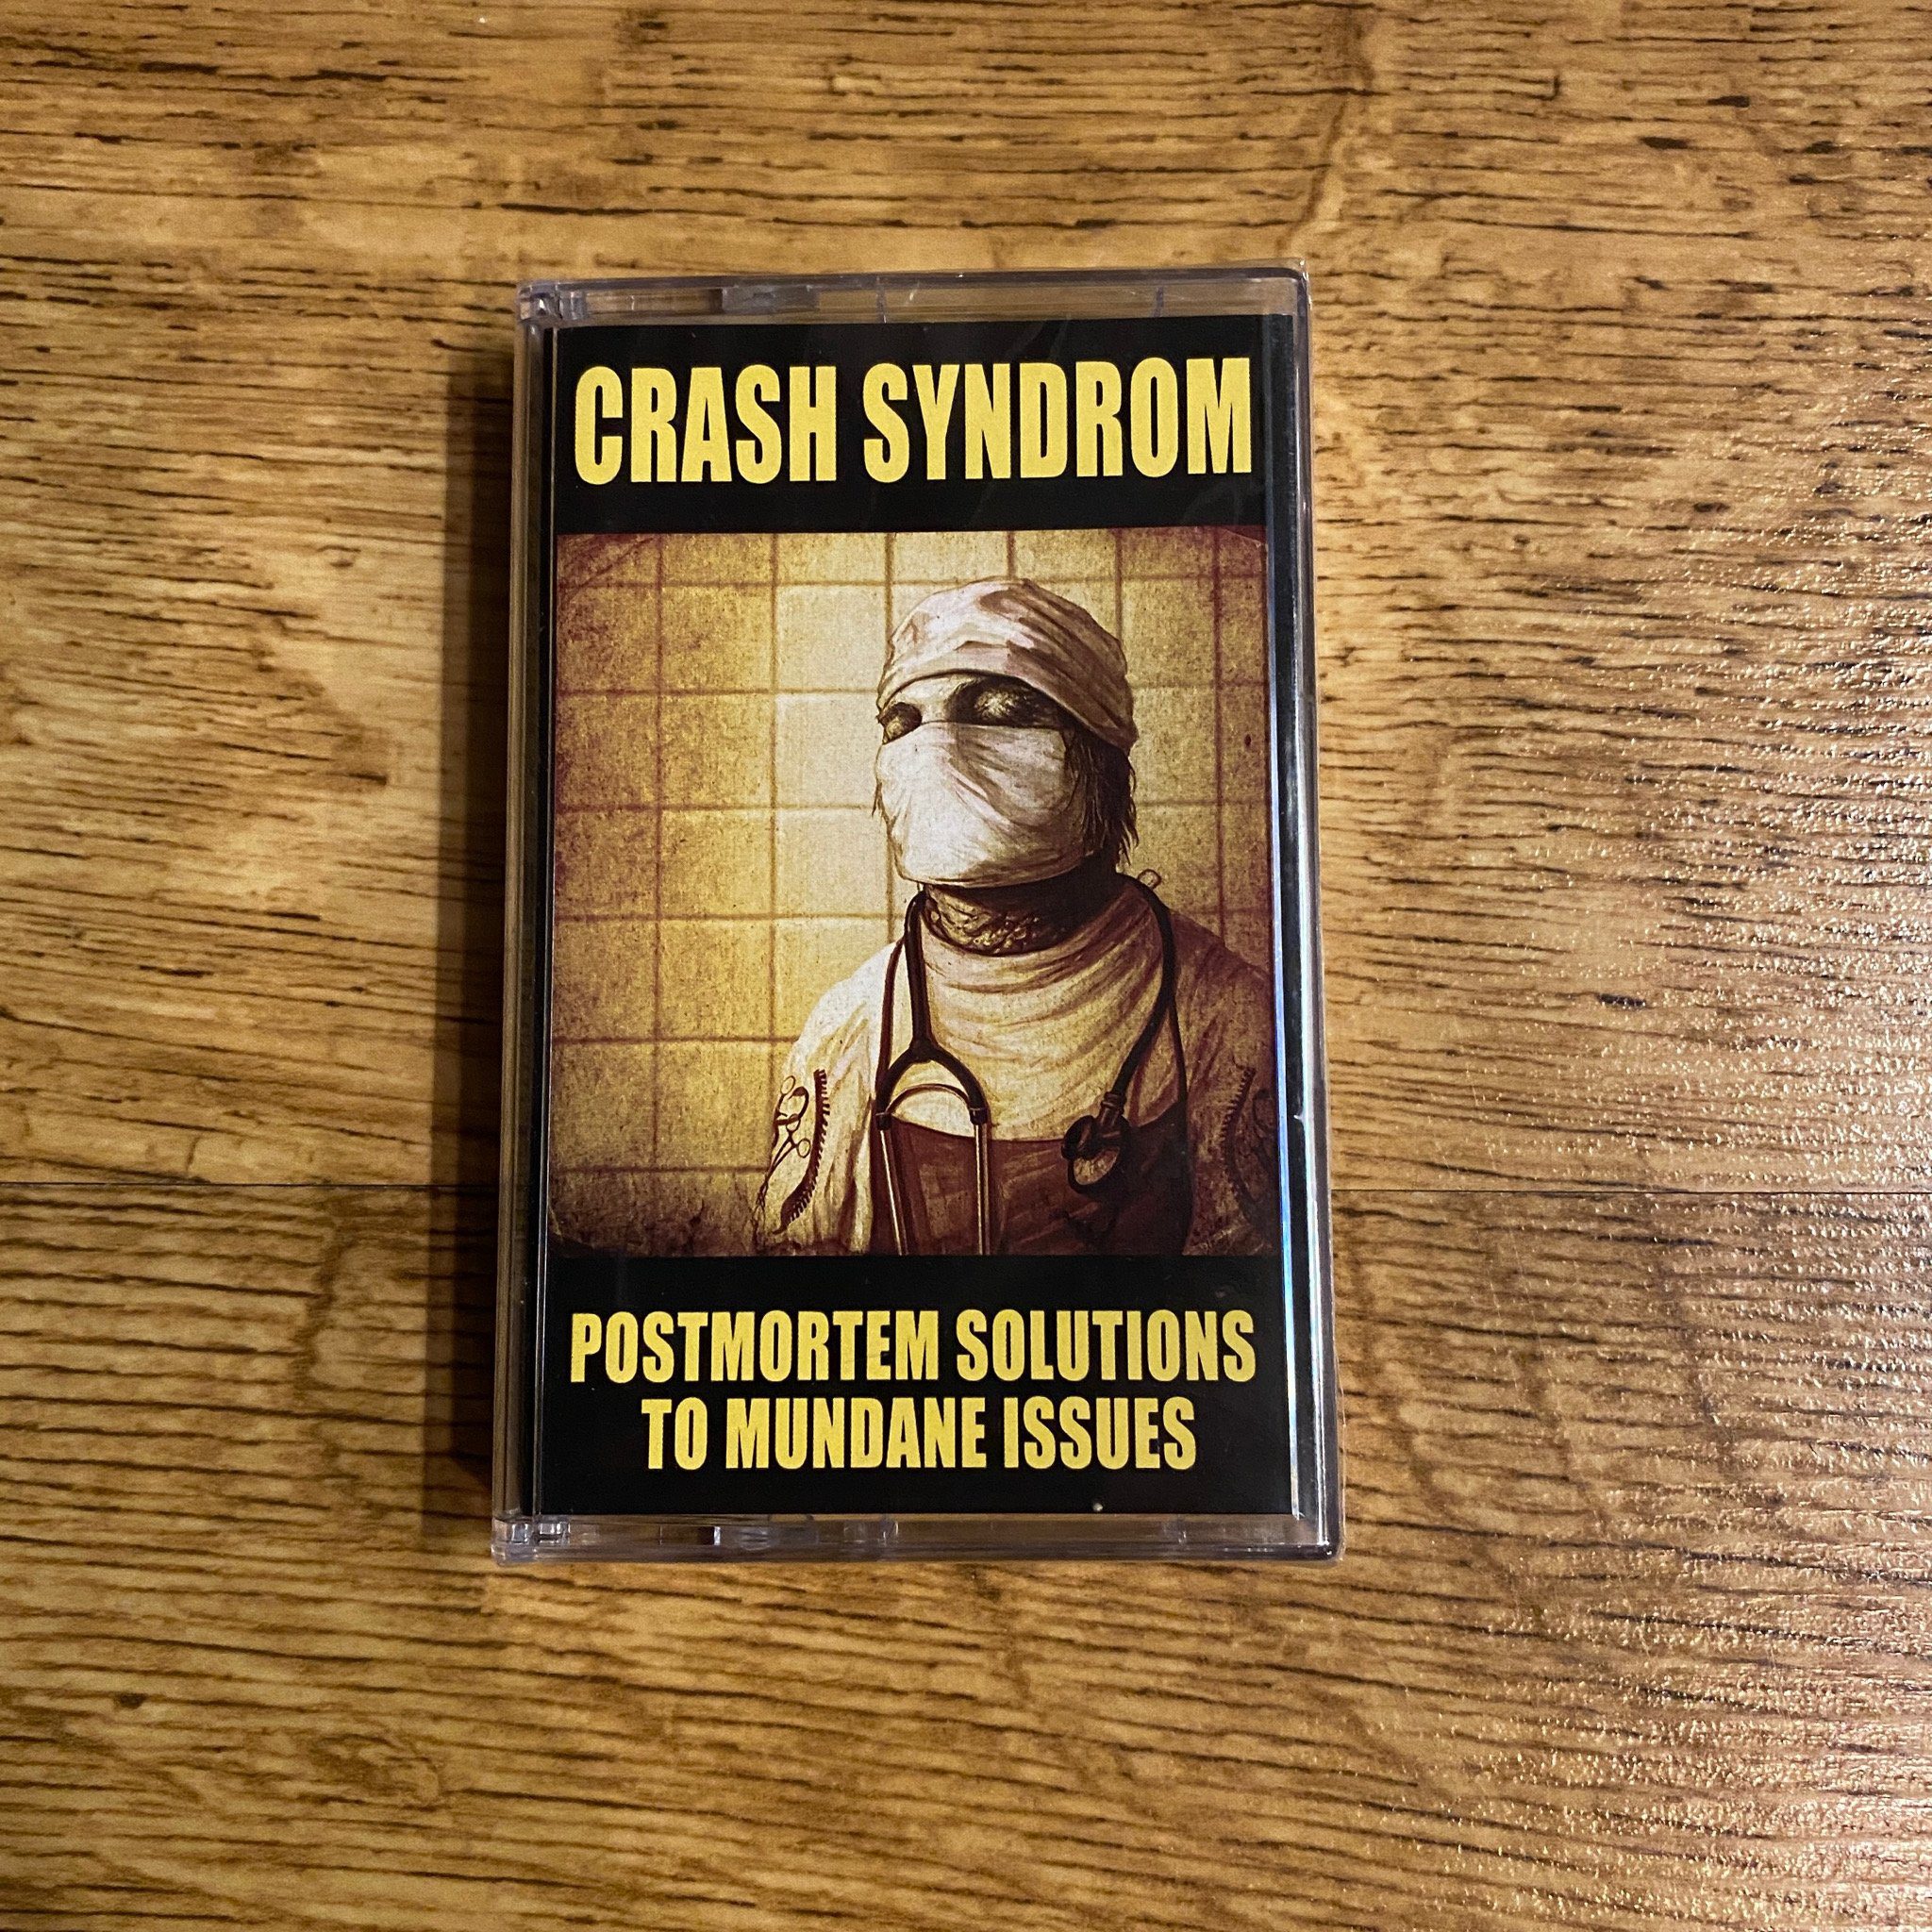 Photo of the Crash Syndrom - "Postmortem Solutions to Mundane Issues" MC